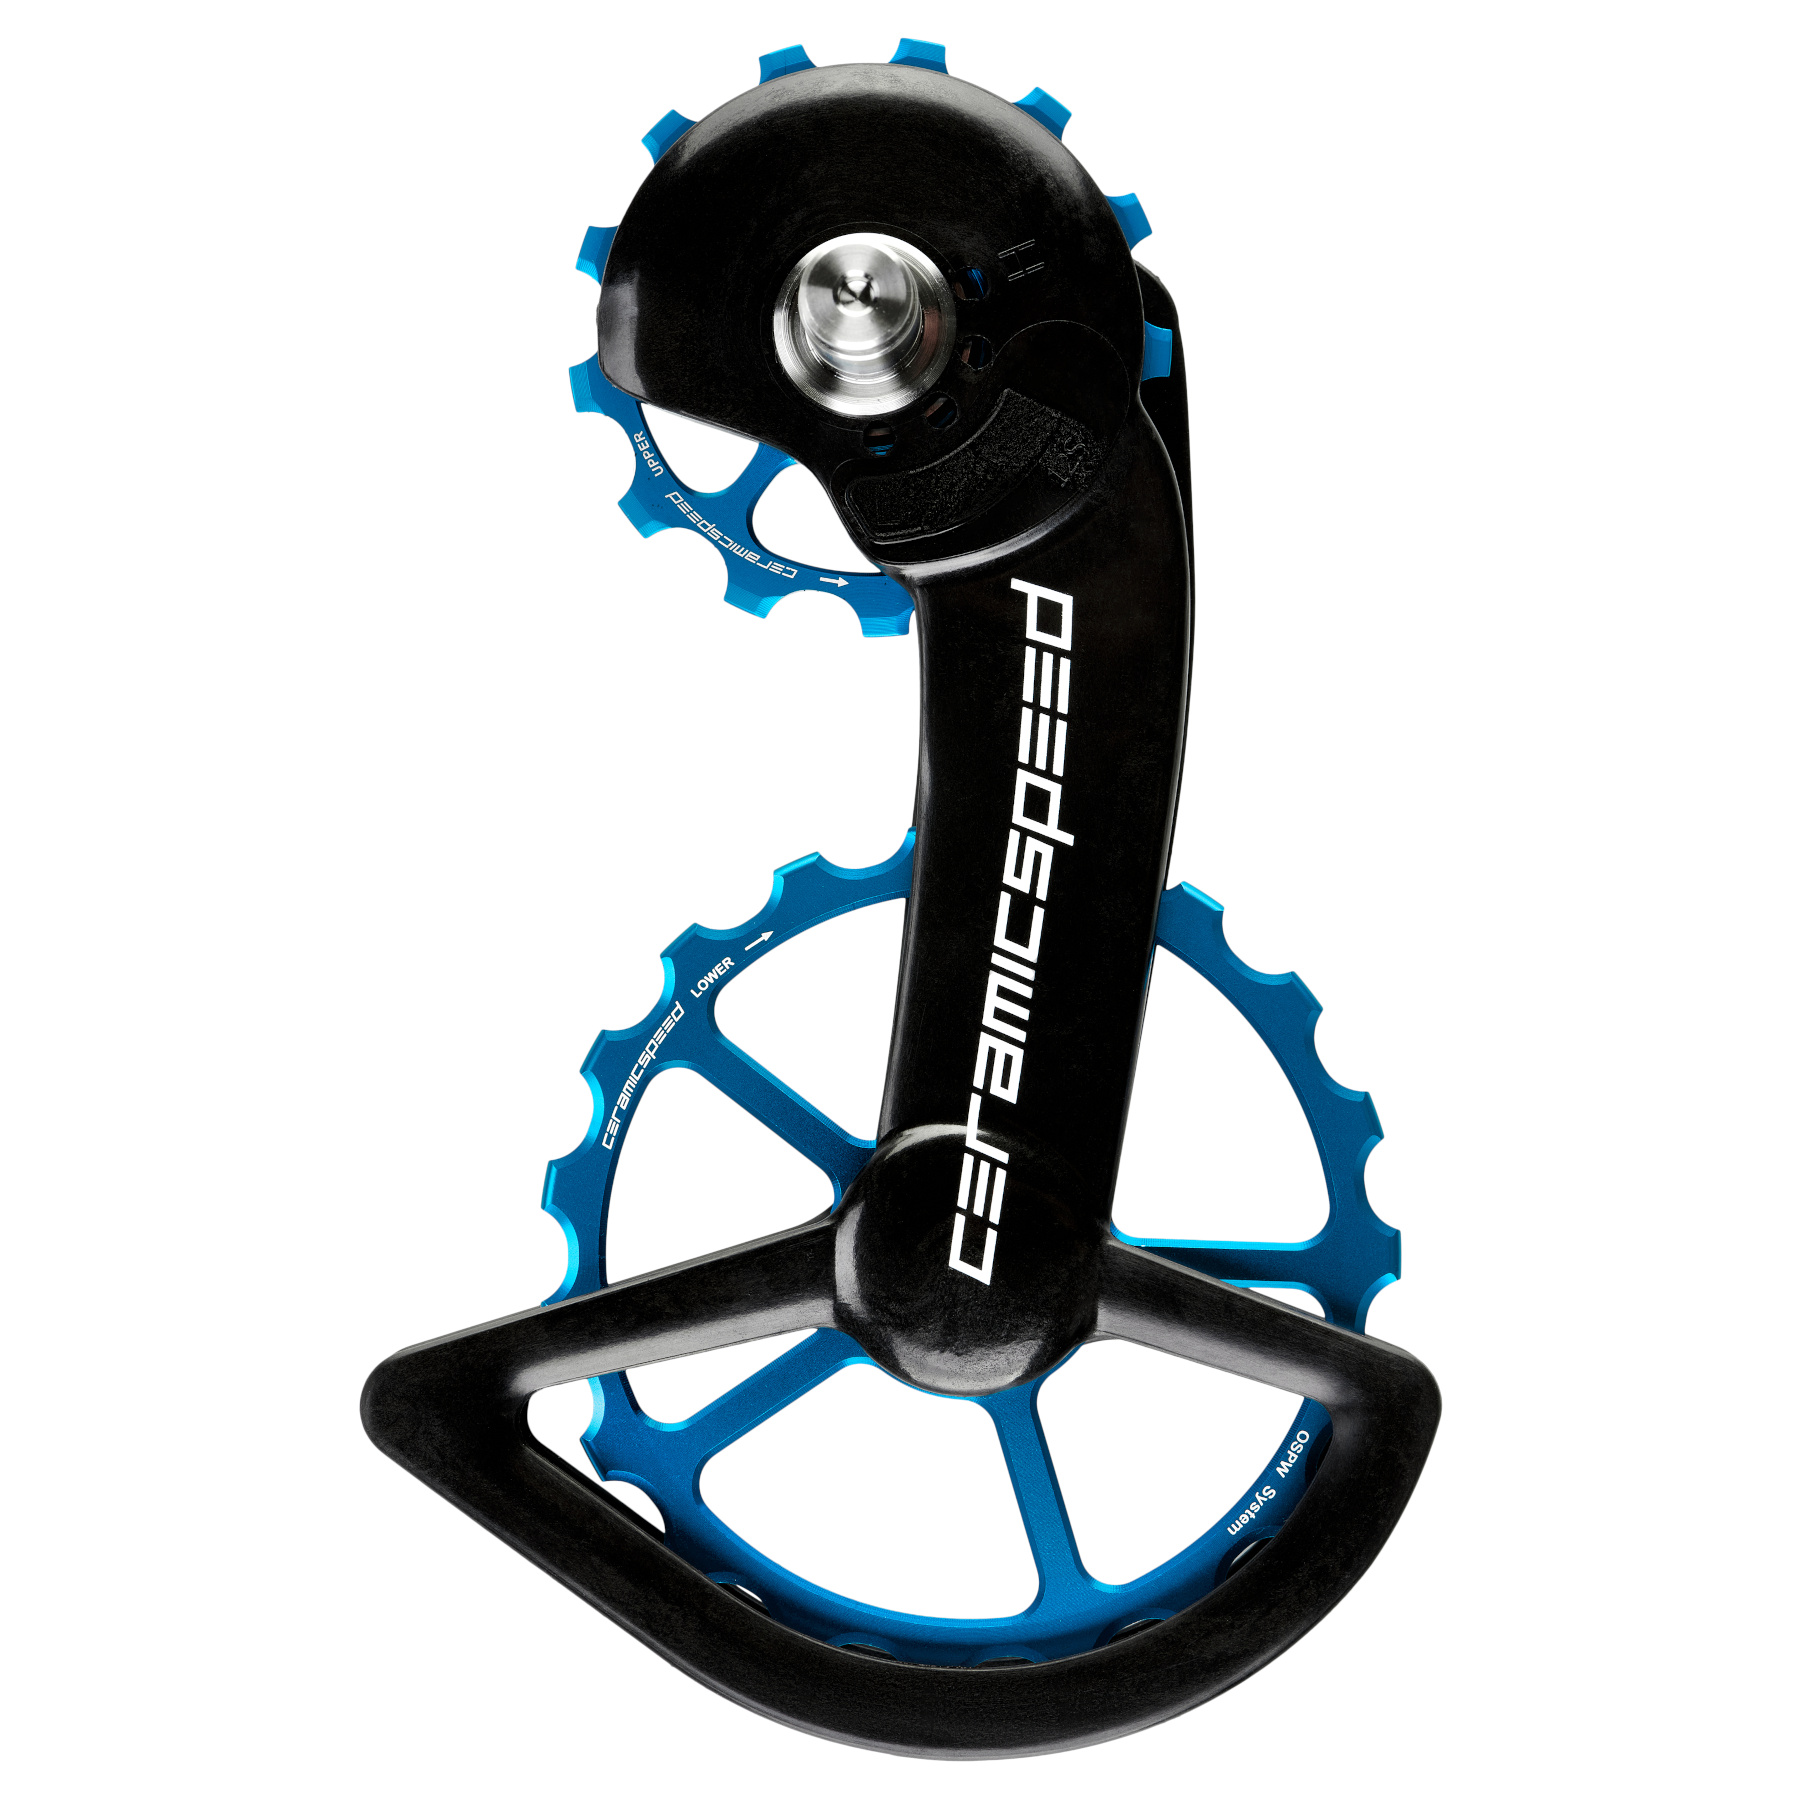 Image of CeramicSpeed OSPW Derailleur Pulley System - for Shimano R9200/R8100 (12s) | 13/19 Teeth | Coated Bearings - blue